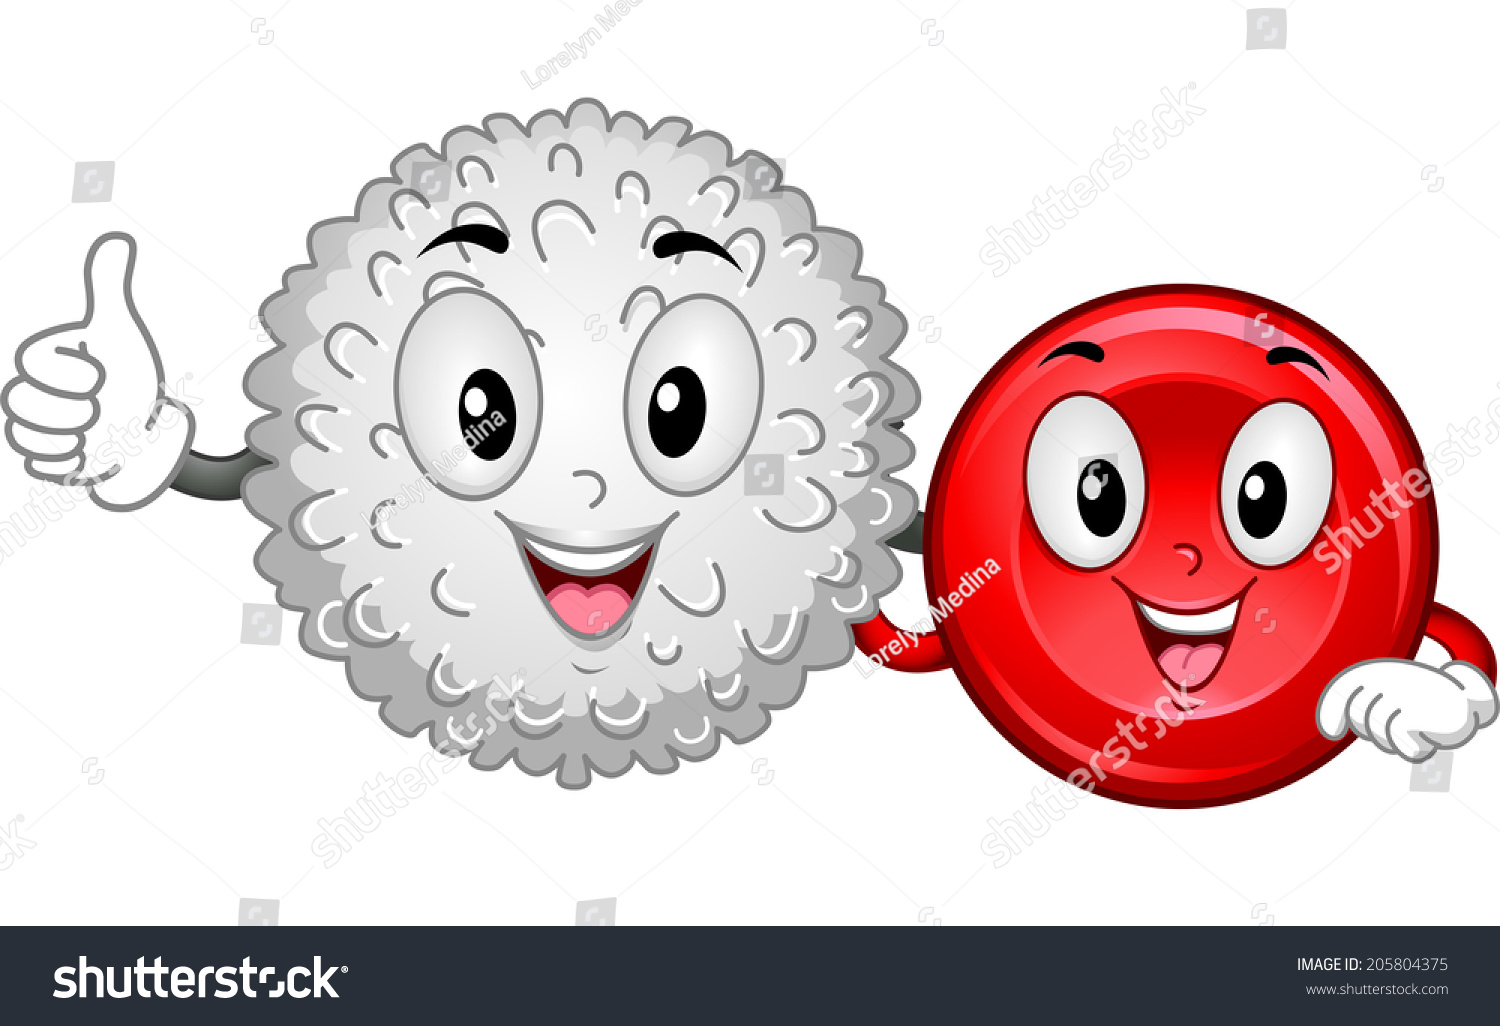 clipart red blood cell - photo #41